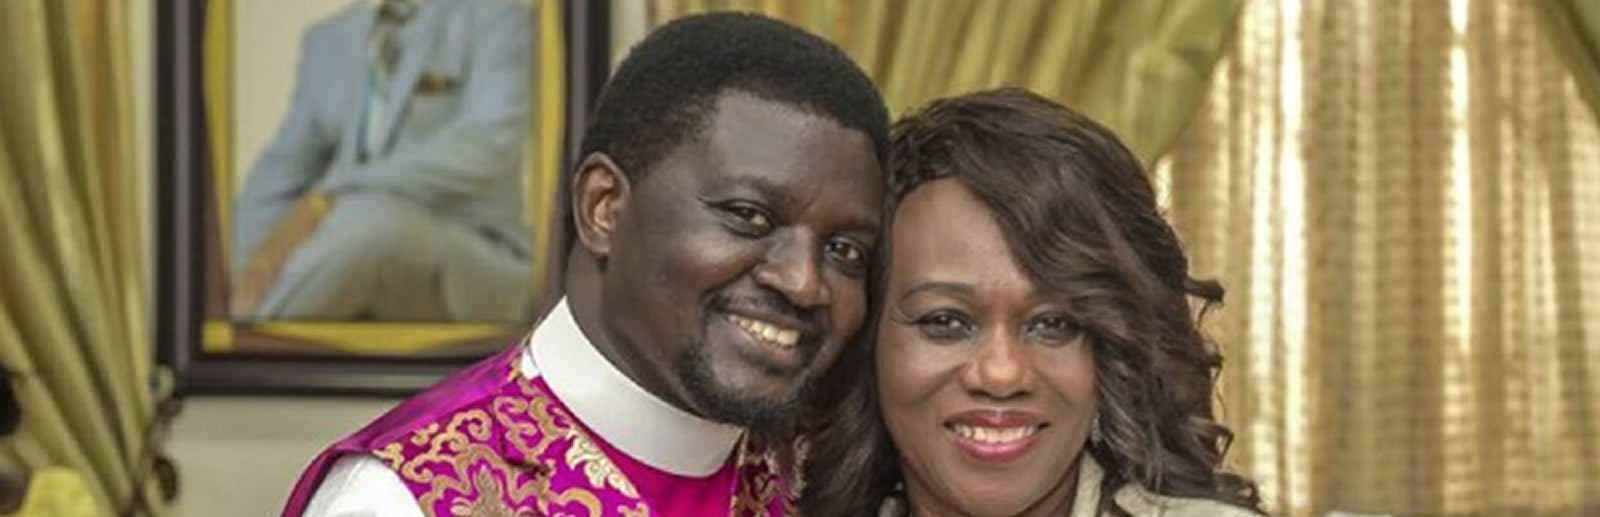 Bishop Agyinasare is sure of his wife, He is confident that she is a faithful woman.